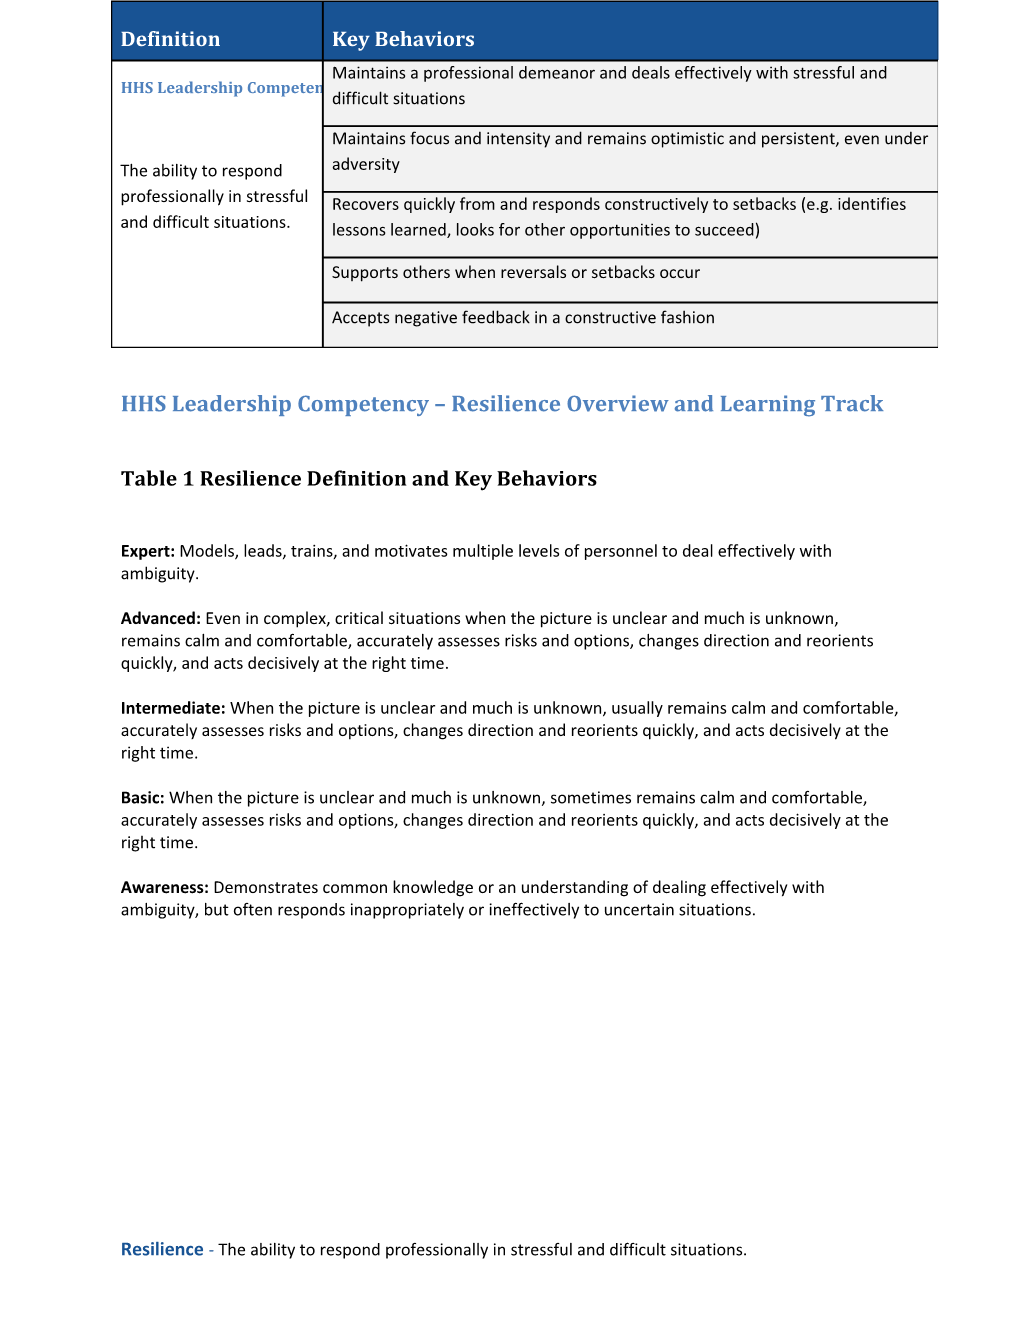 HHS Leadership Competency